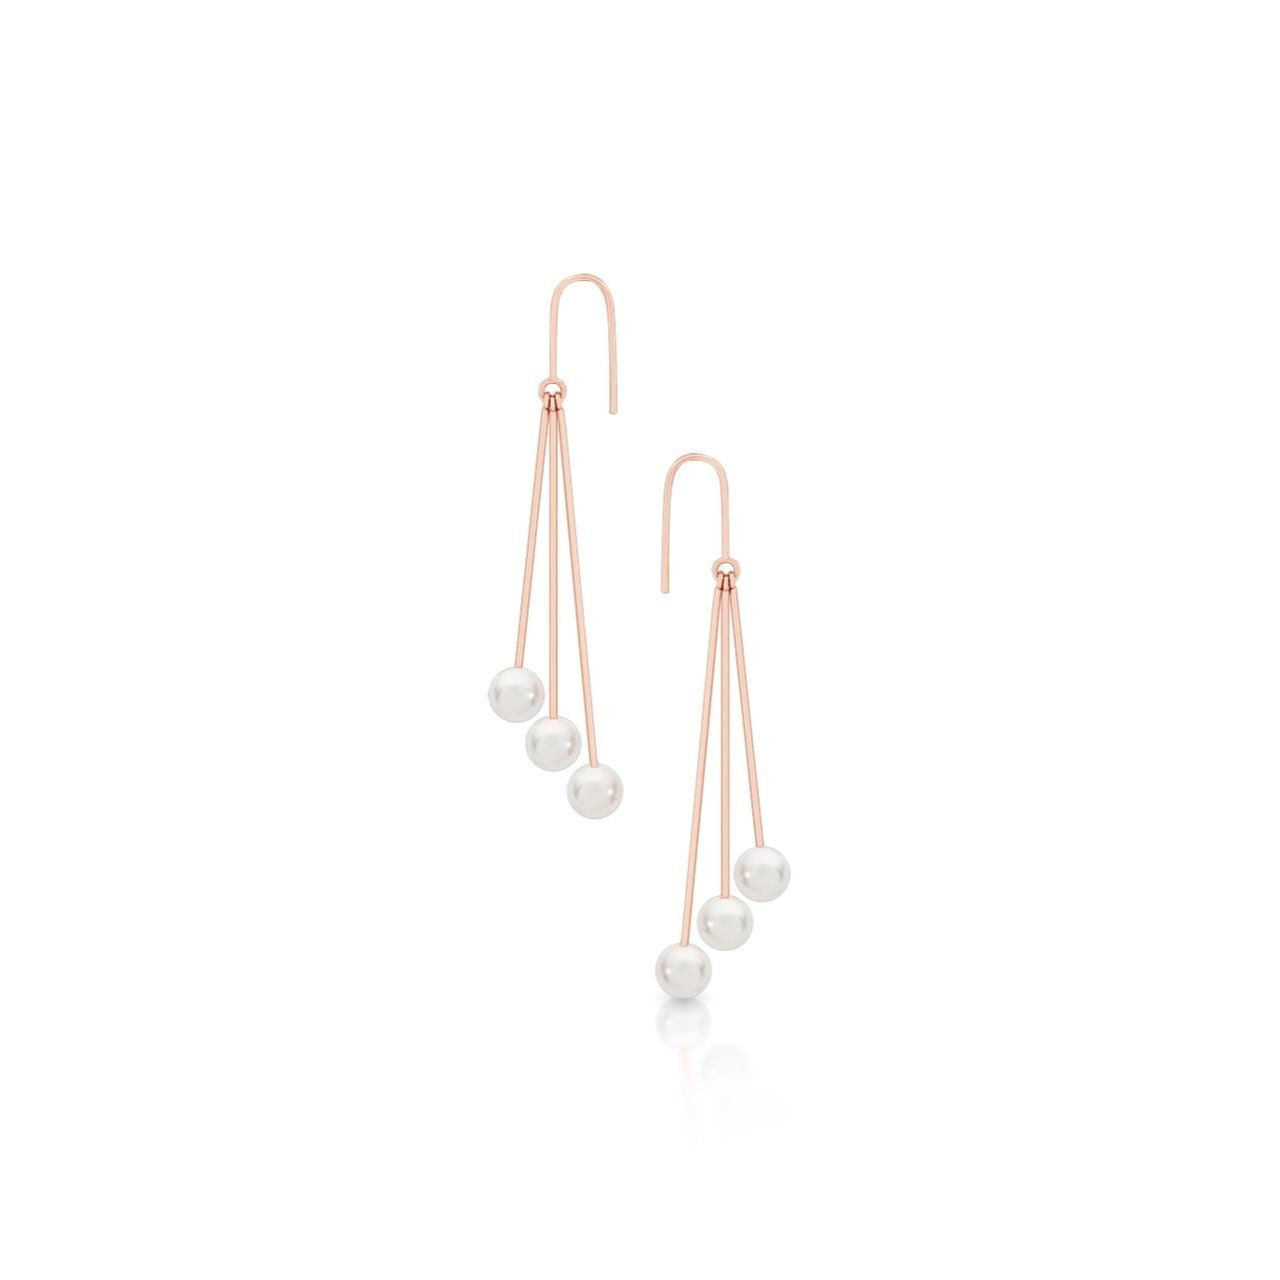 Romi Dublin Rose Gold Pearl Star Burst Earrings  The classics are what draw us back time and time again and nothing is more classic than Pearls. We were inspired with this collection to bring a modern twist to a timeless classic.